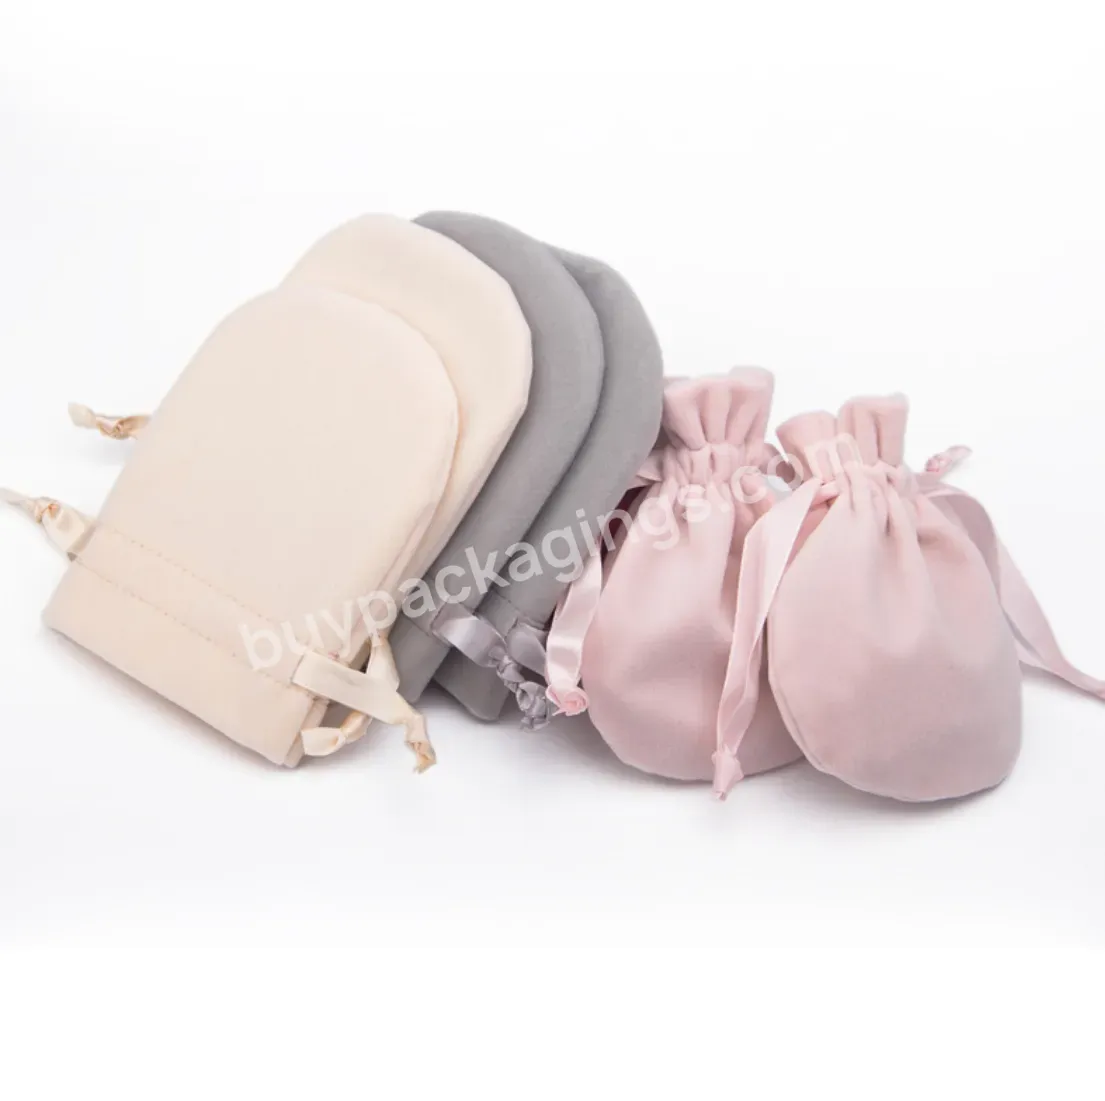 Promo Chinese Manufacturer Custom Luxury Jewelry Pouch Gift Pouch Pink Cute Packaging Bag Pouch - Buy Luxury Jewelry Pouch,Cute Packaging Bag,Promo Customjewelry Pouch Bag.